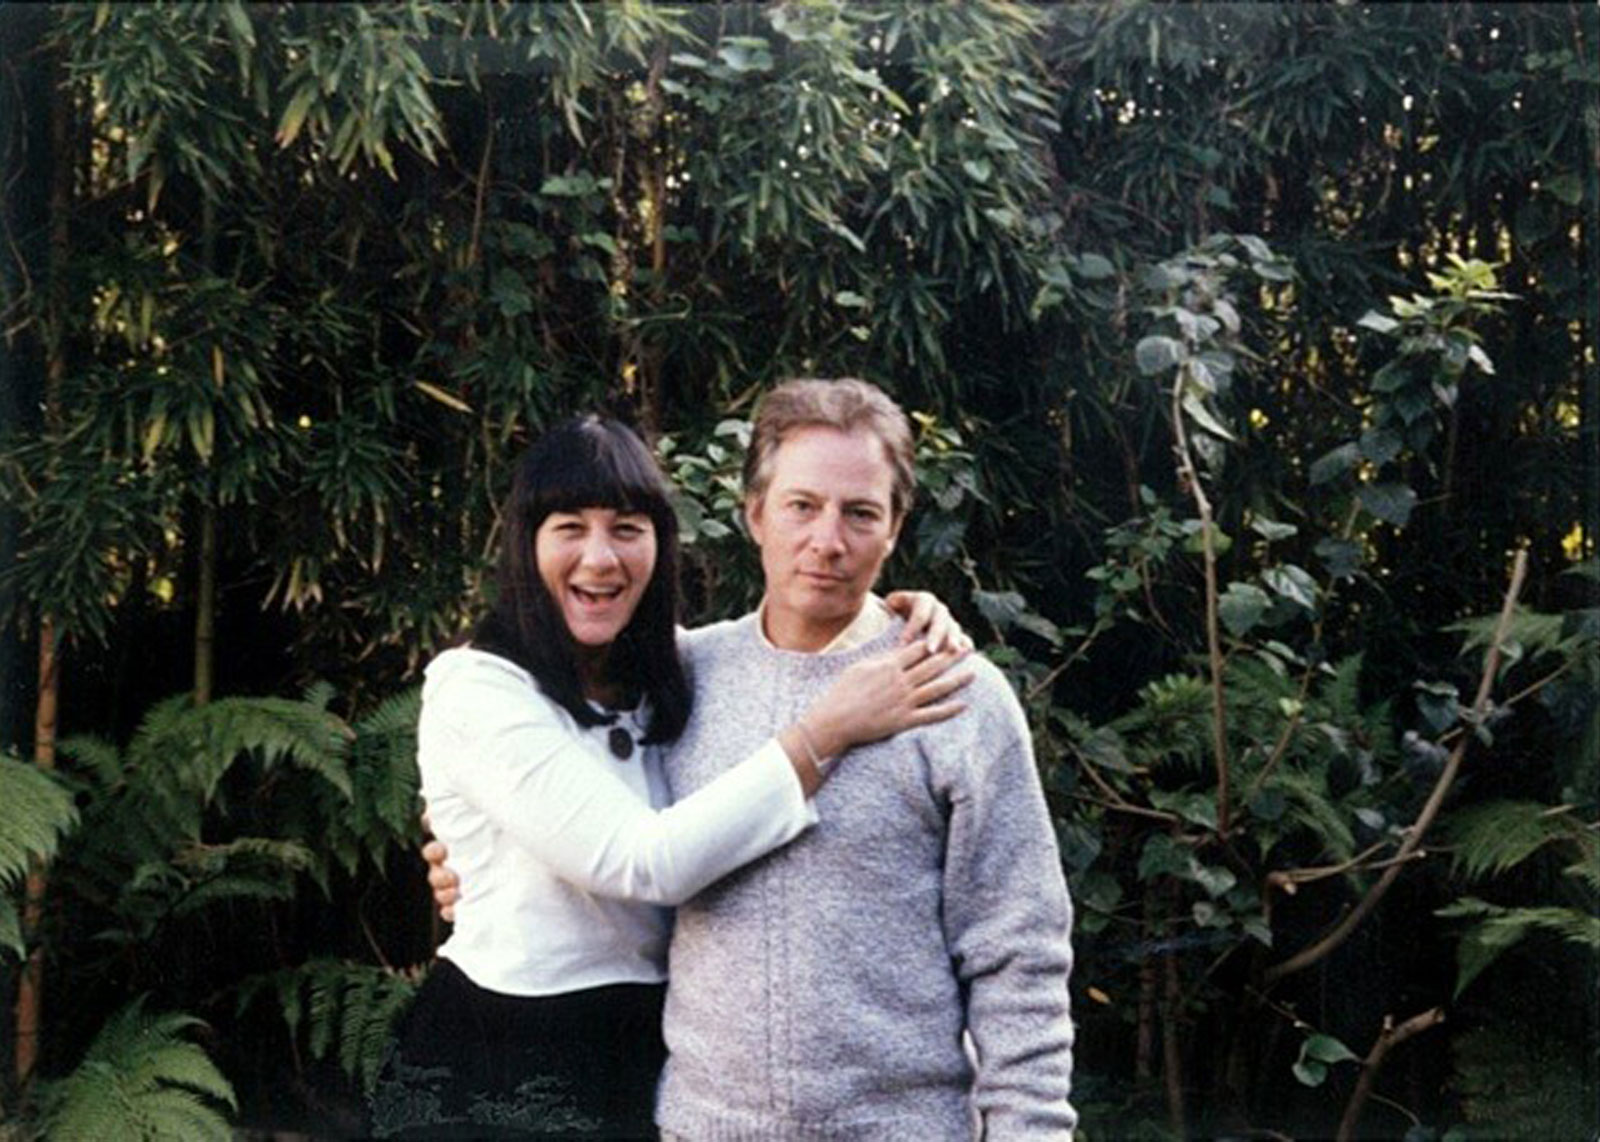 Susan Berman and Robert Durst in mid to late 1990s.